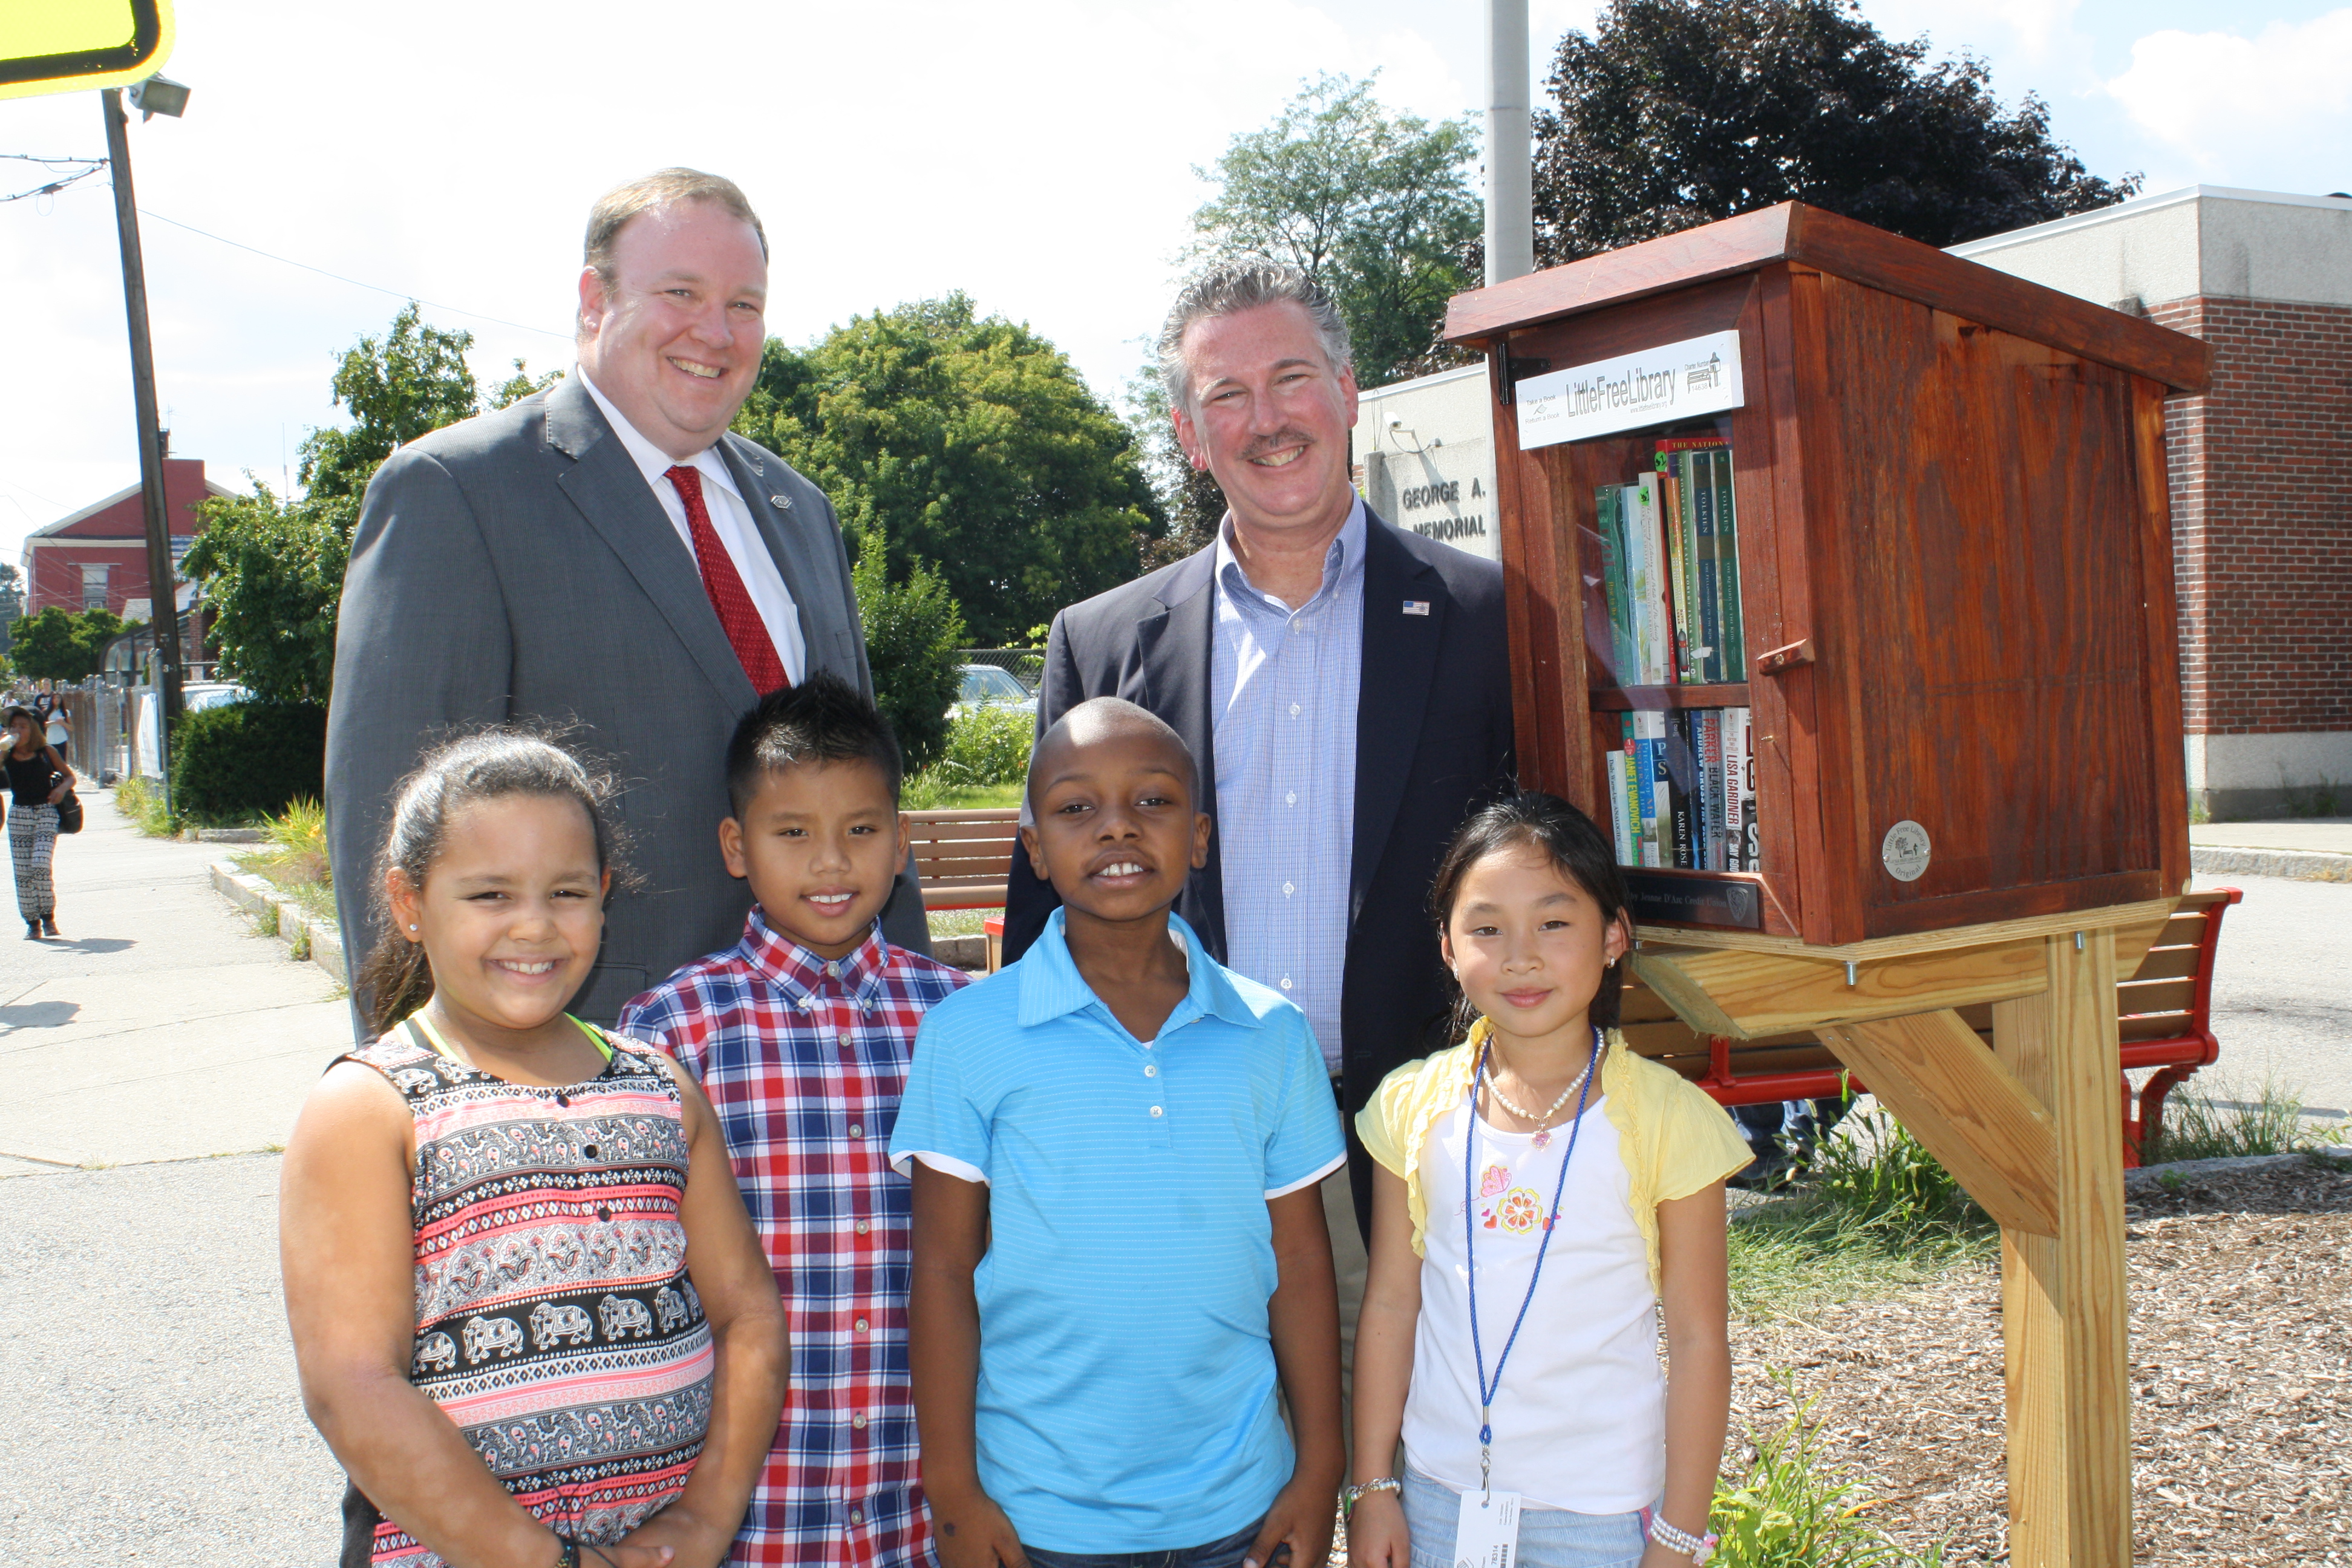 Children in front of Little Free Library in Lowell